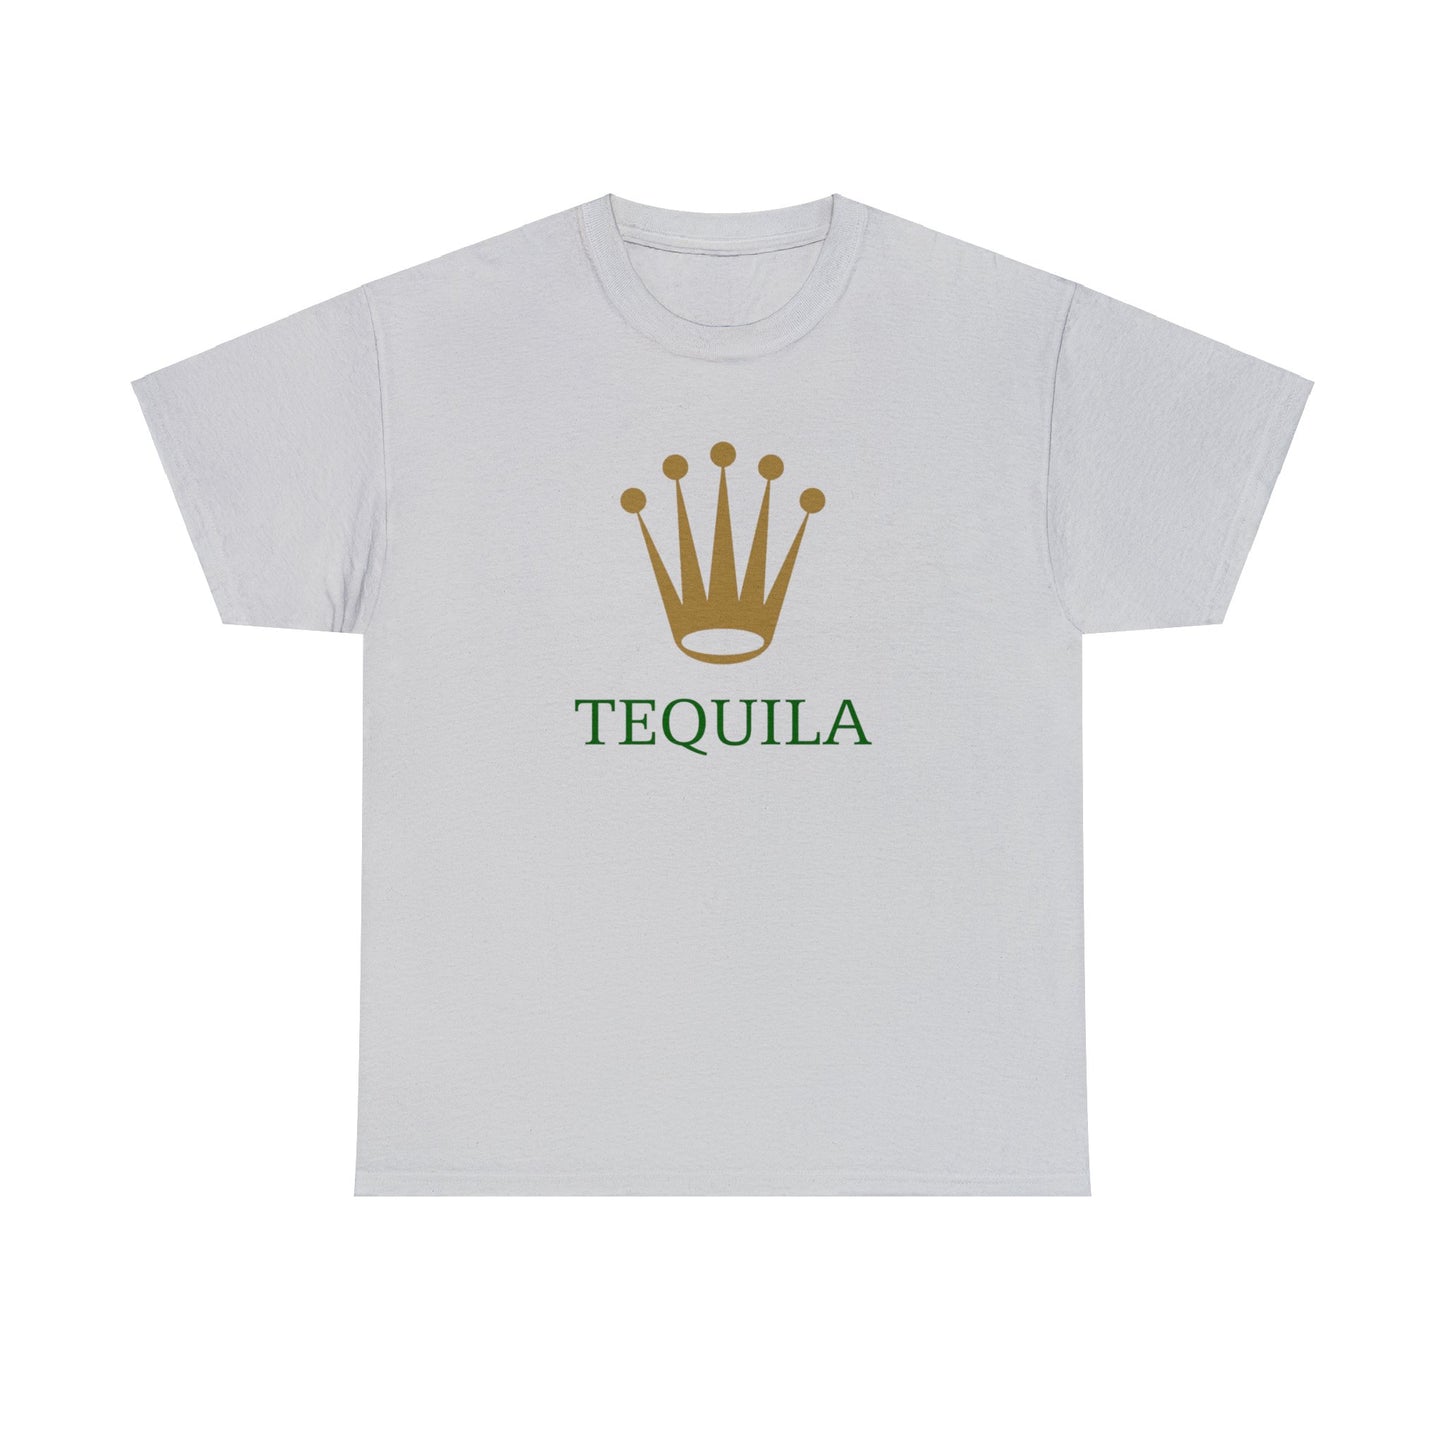 Tequila is King